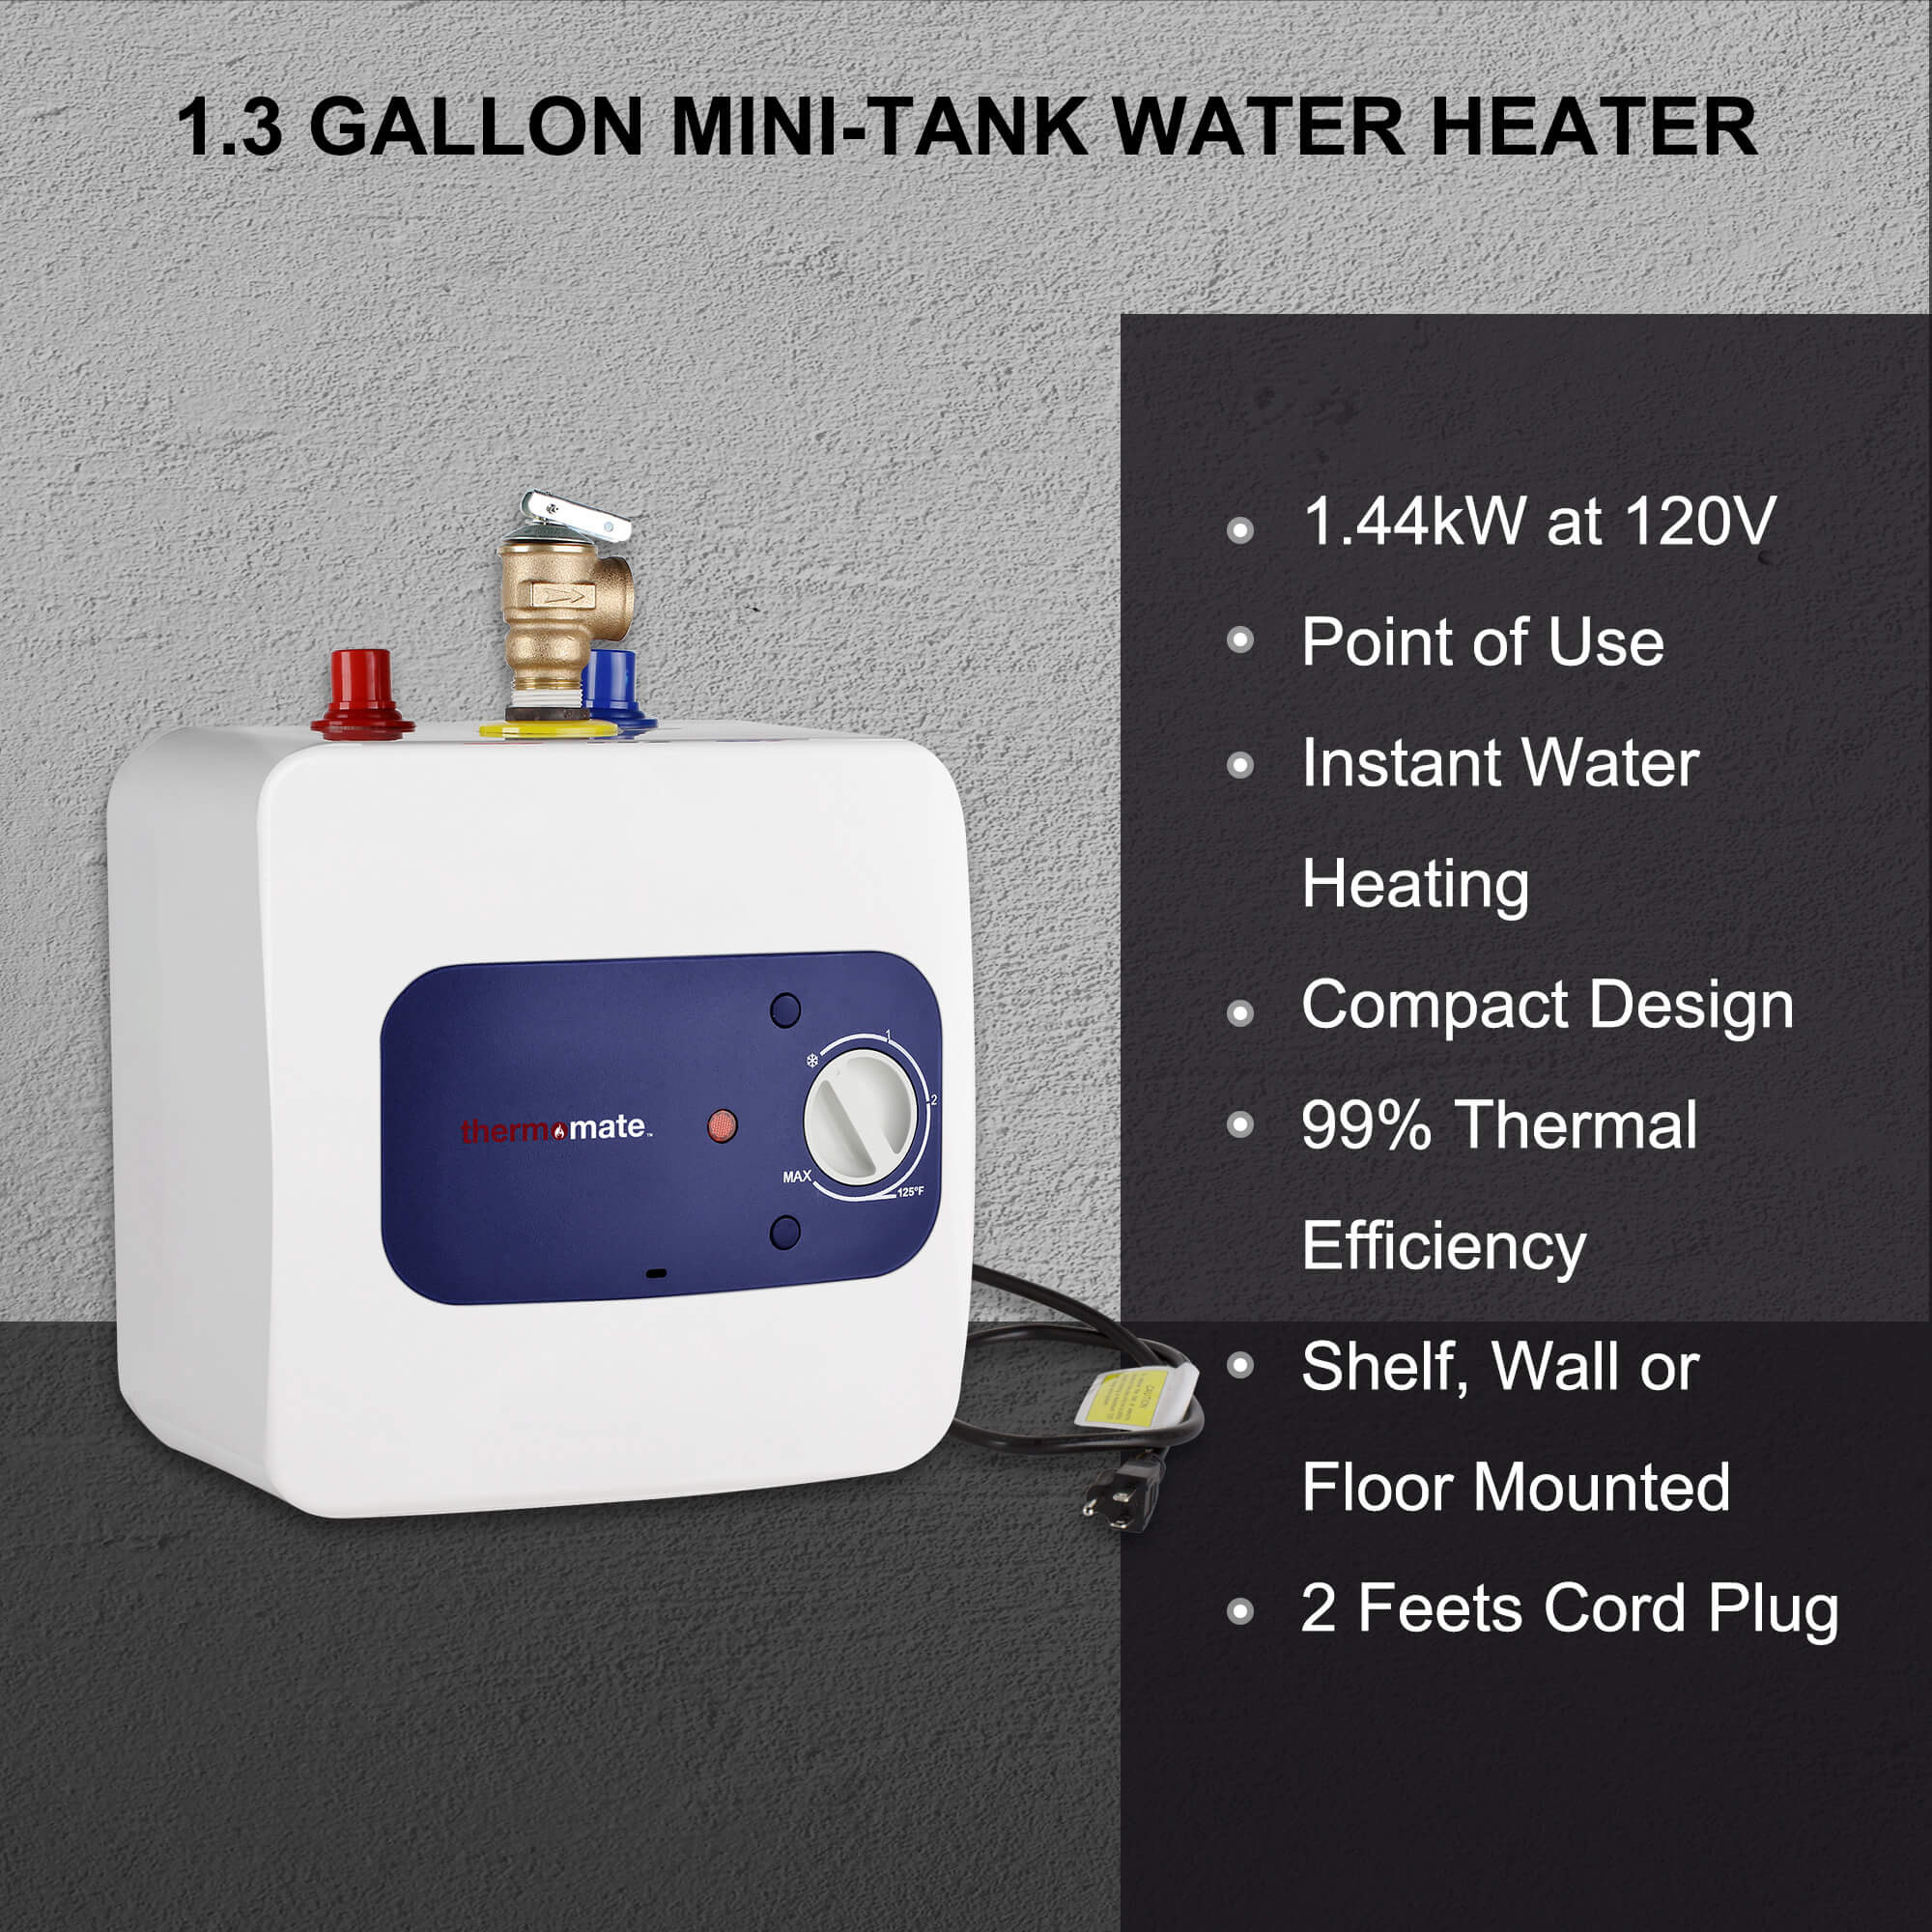 Domestic Hot Water Systems - Heat-Timer® Corporation